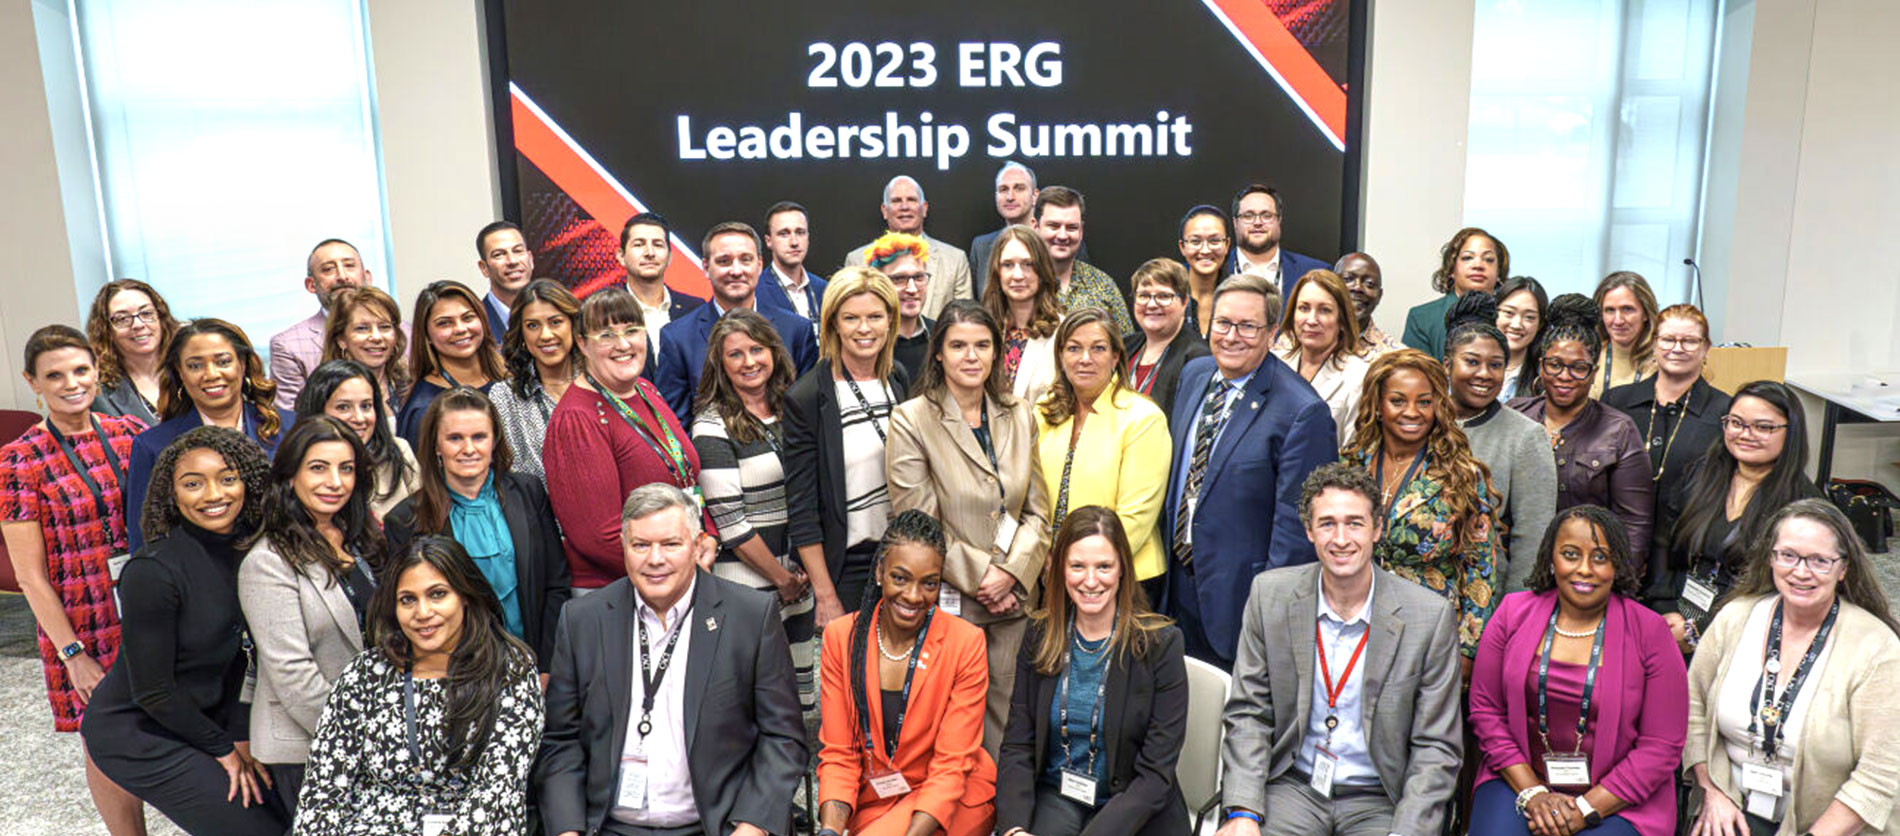 Employees at the ERG Leardership Summit 2023